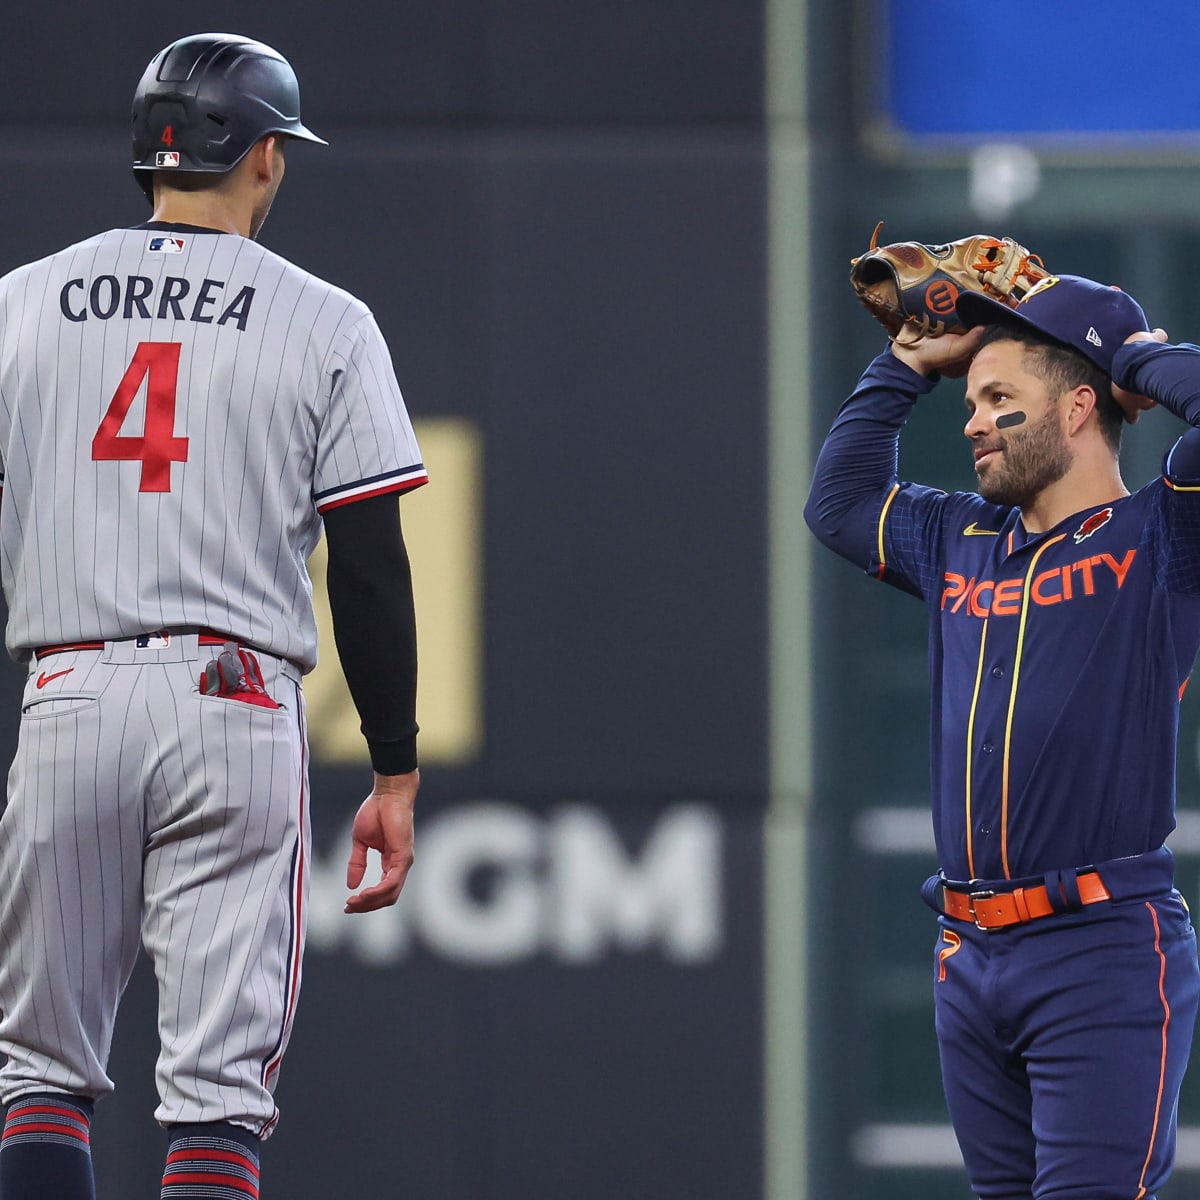 Three-time All-Star and former Met believes team will sign Carlos Correa